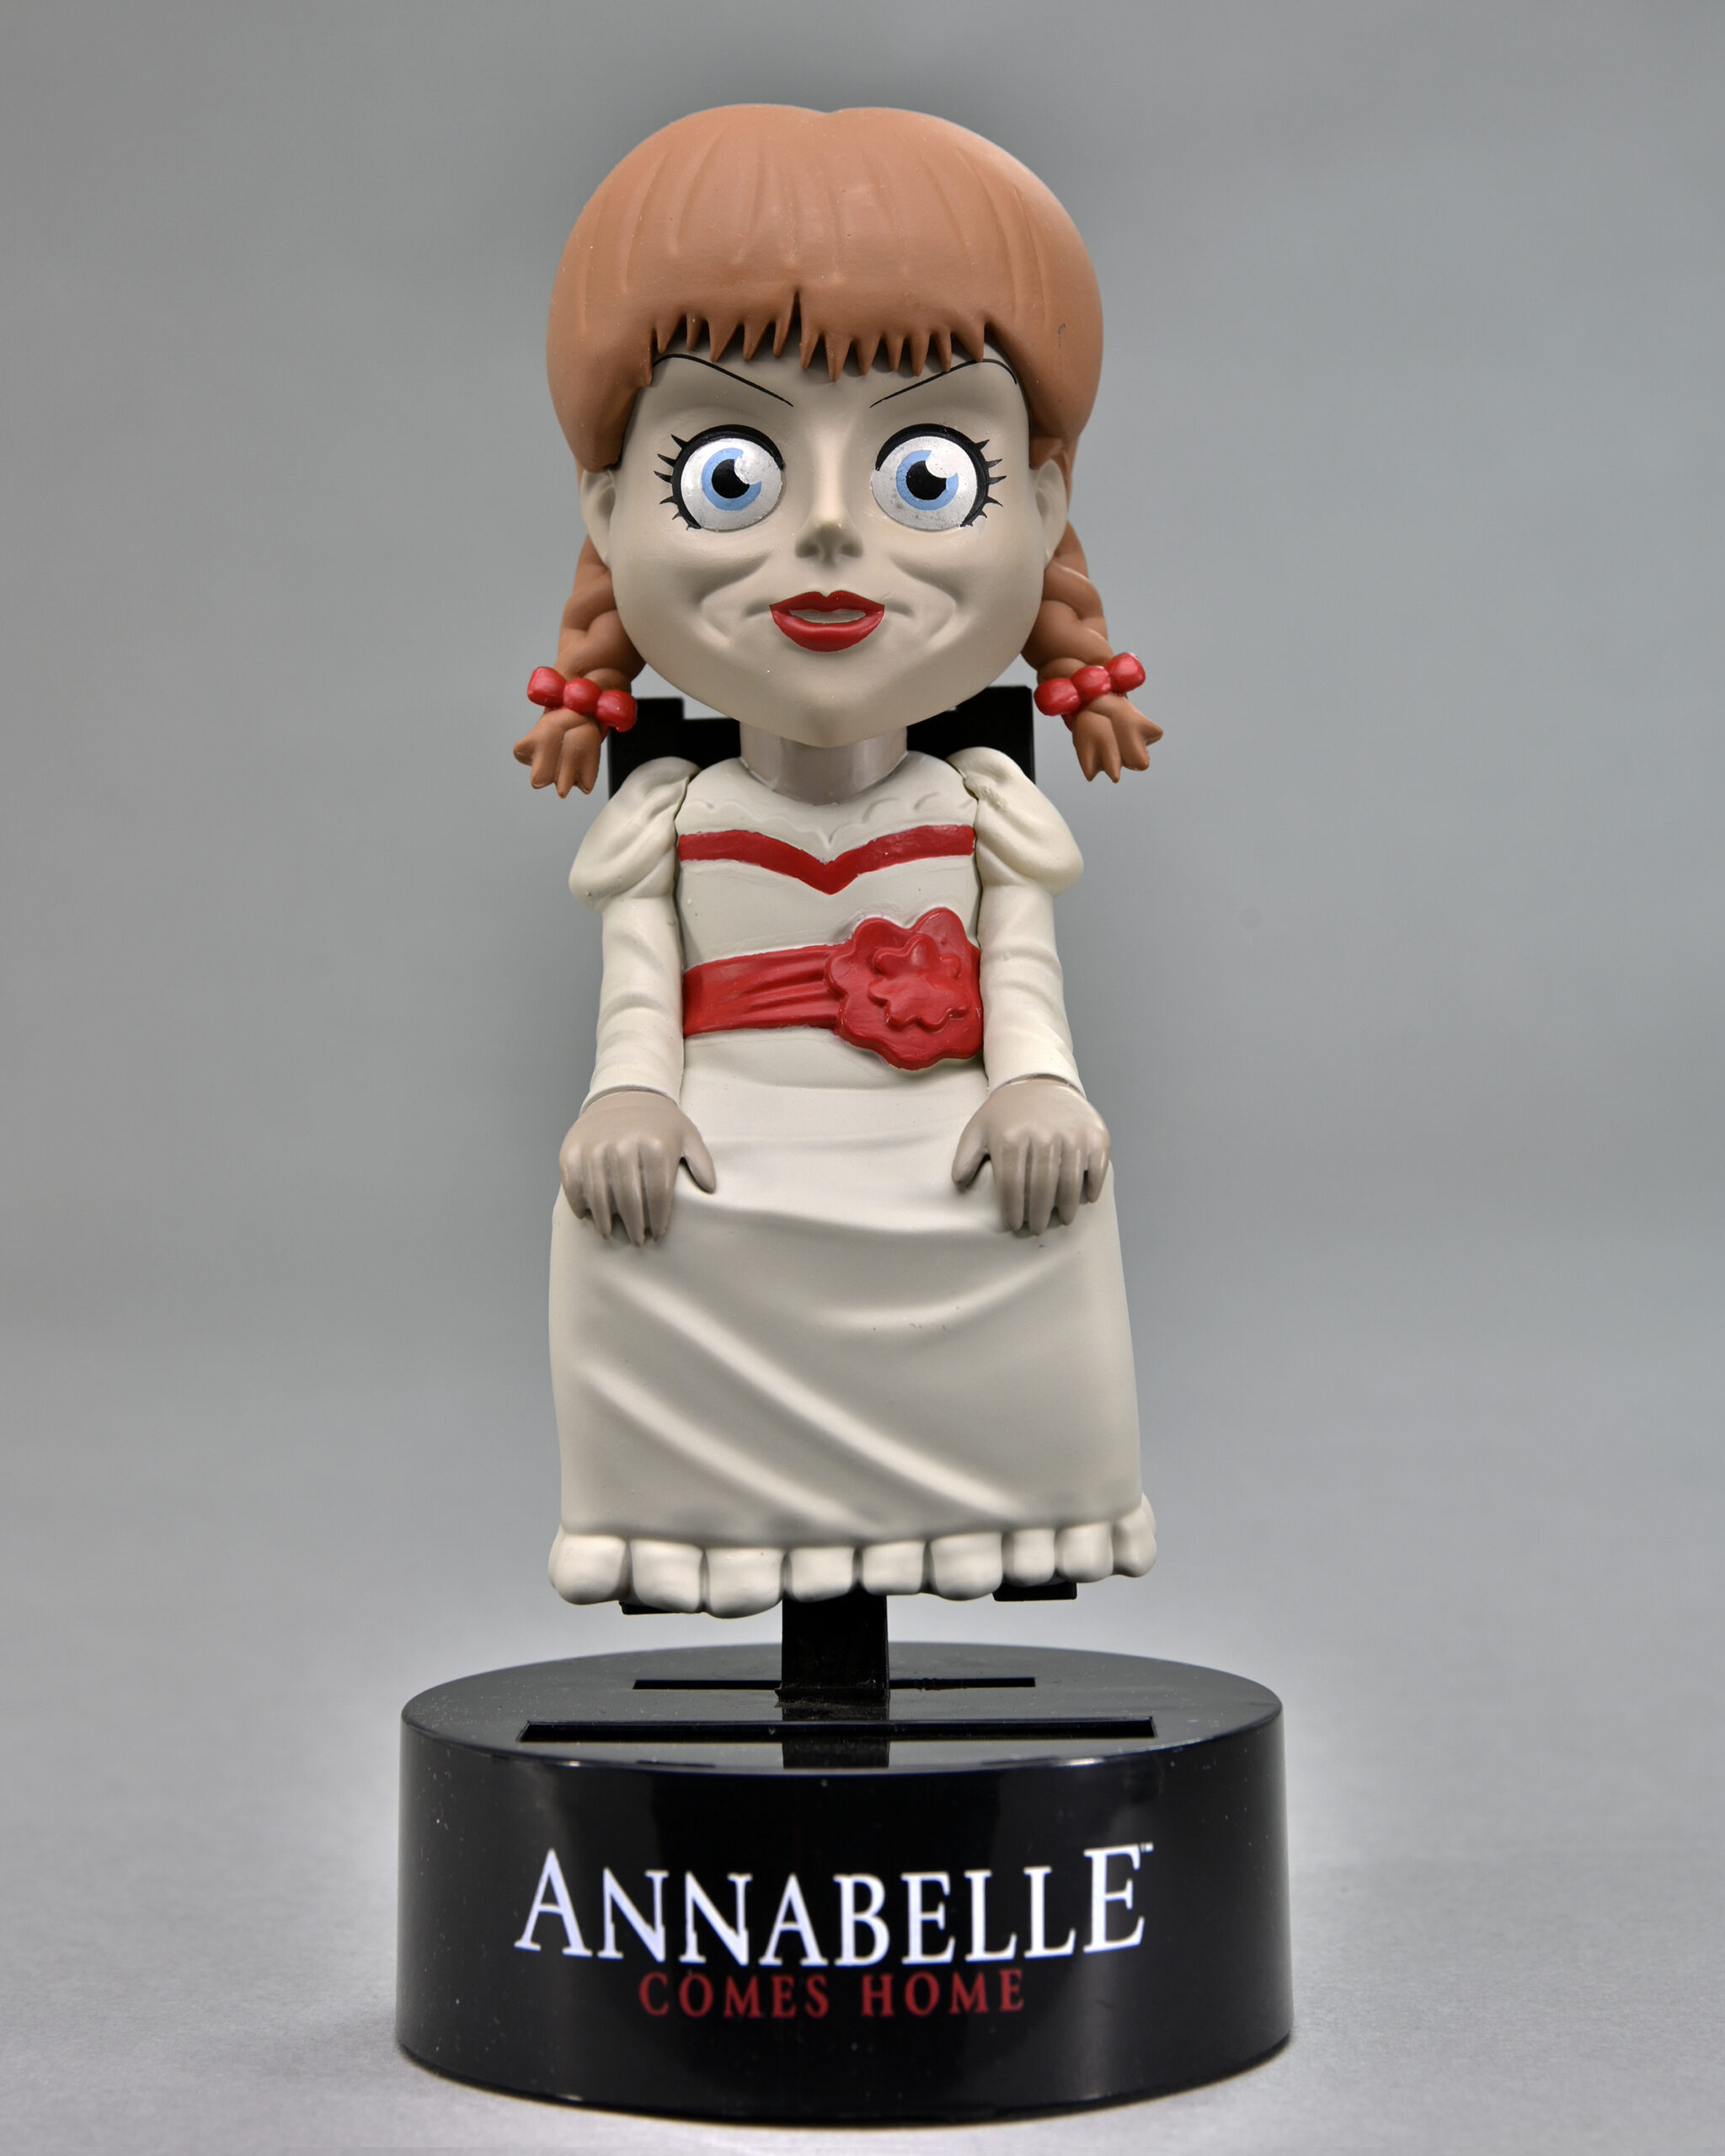 NECAOnline.com | The Conjuring Universe - Body Knocker - Annabelle